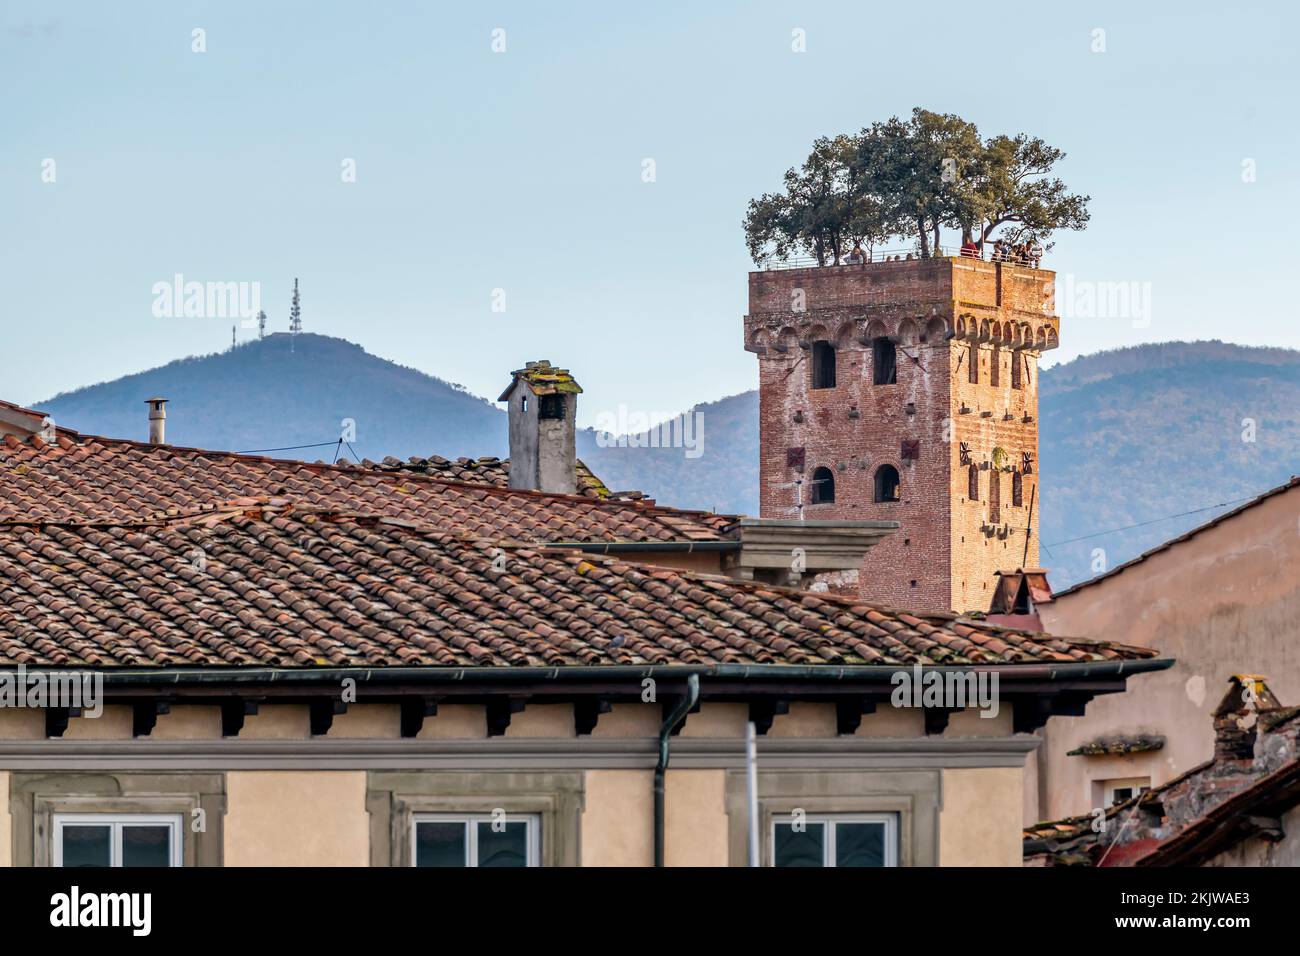 The beautiful Torre Guinigi tower with trees above, stands among the rooftops of the historic center of Lucca, Tuscany, Italy Stock Photo